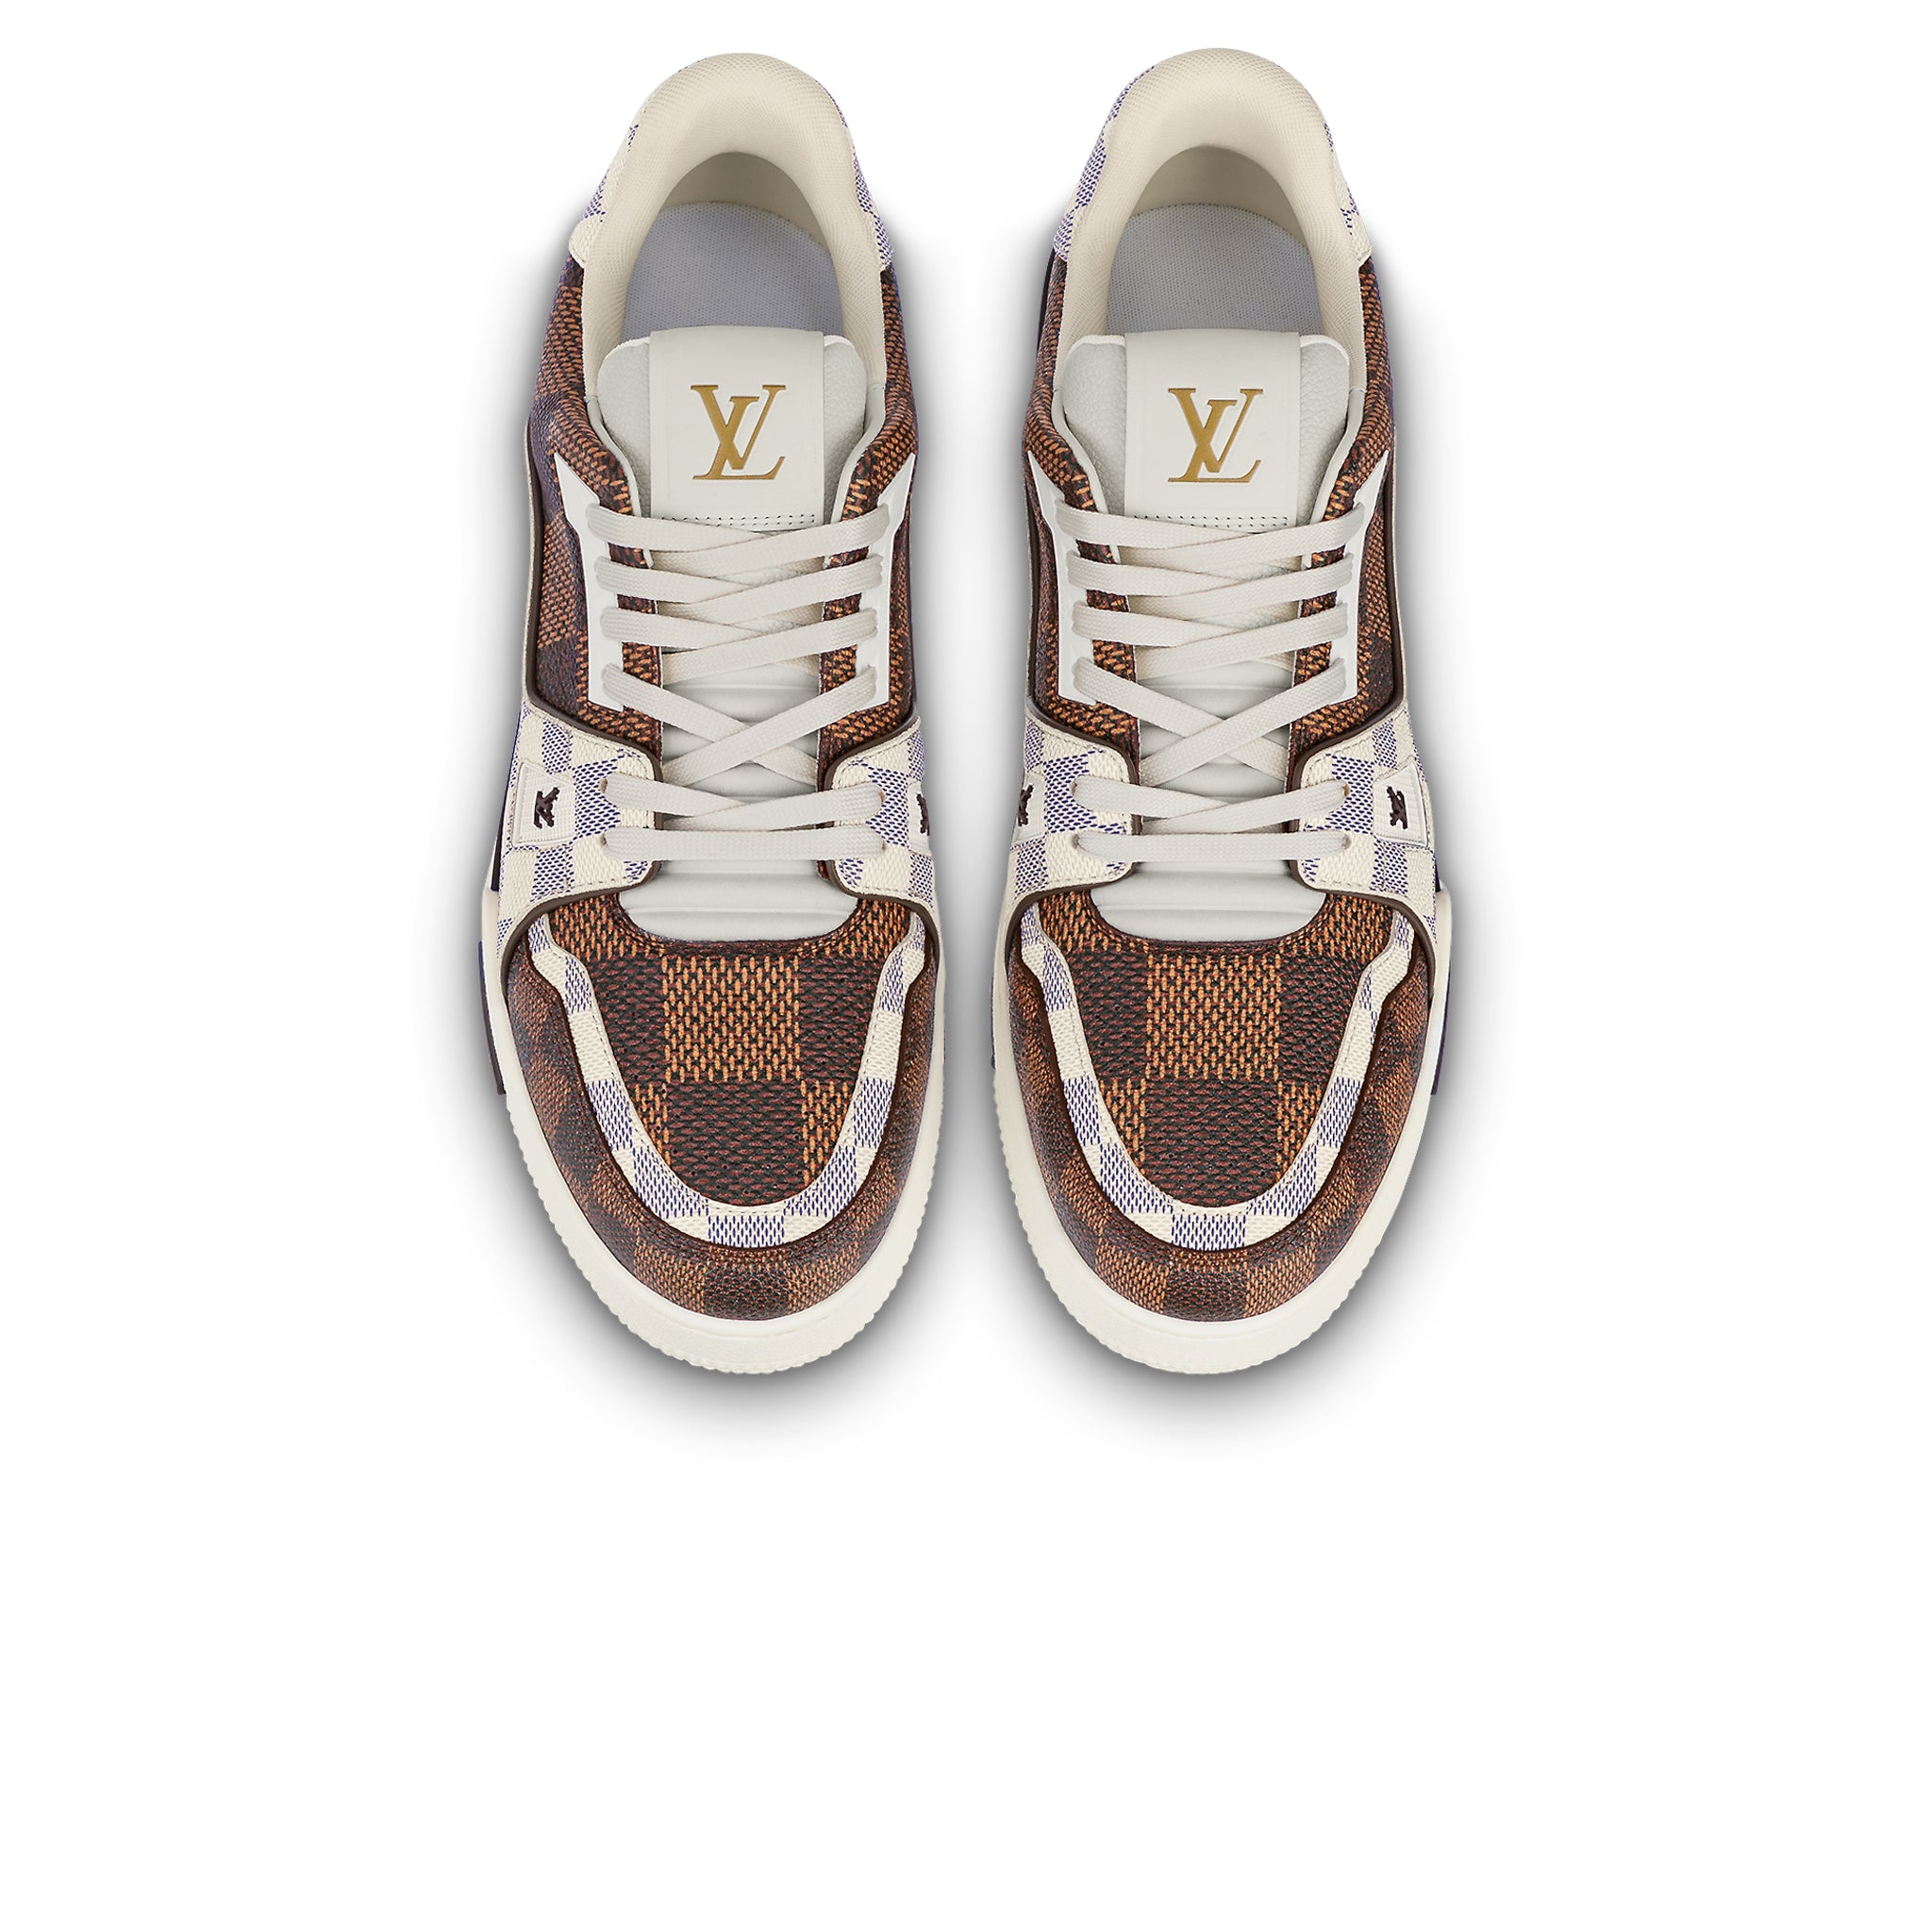 Louis Vuitton Lv Trainer Damier Brand New Size 6 Sold Out!